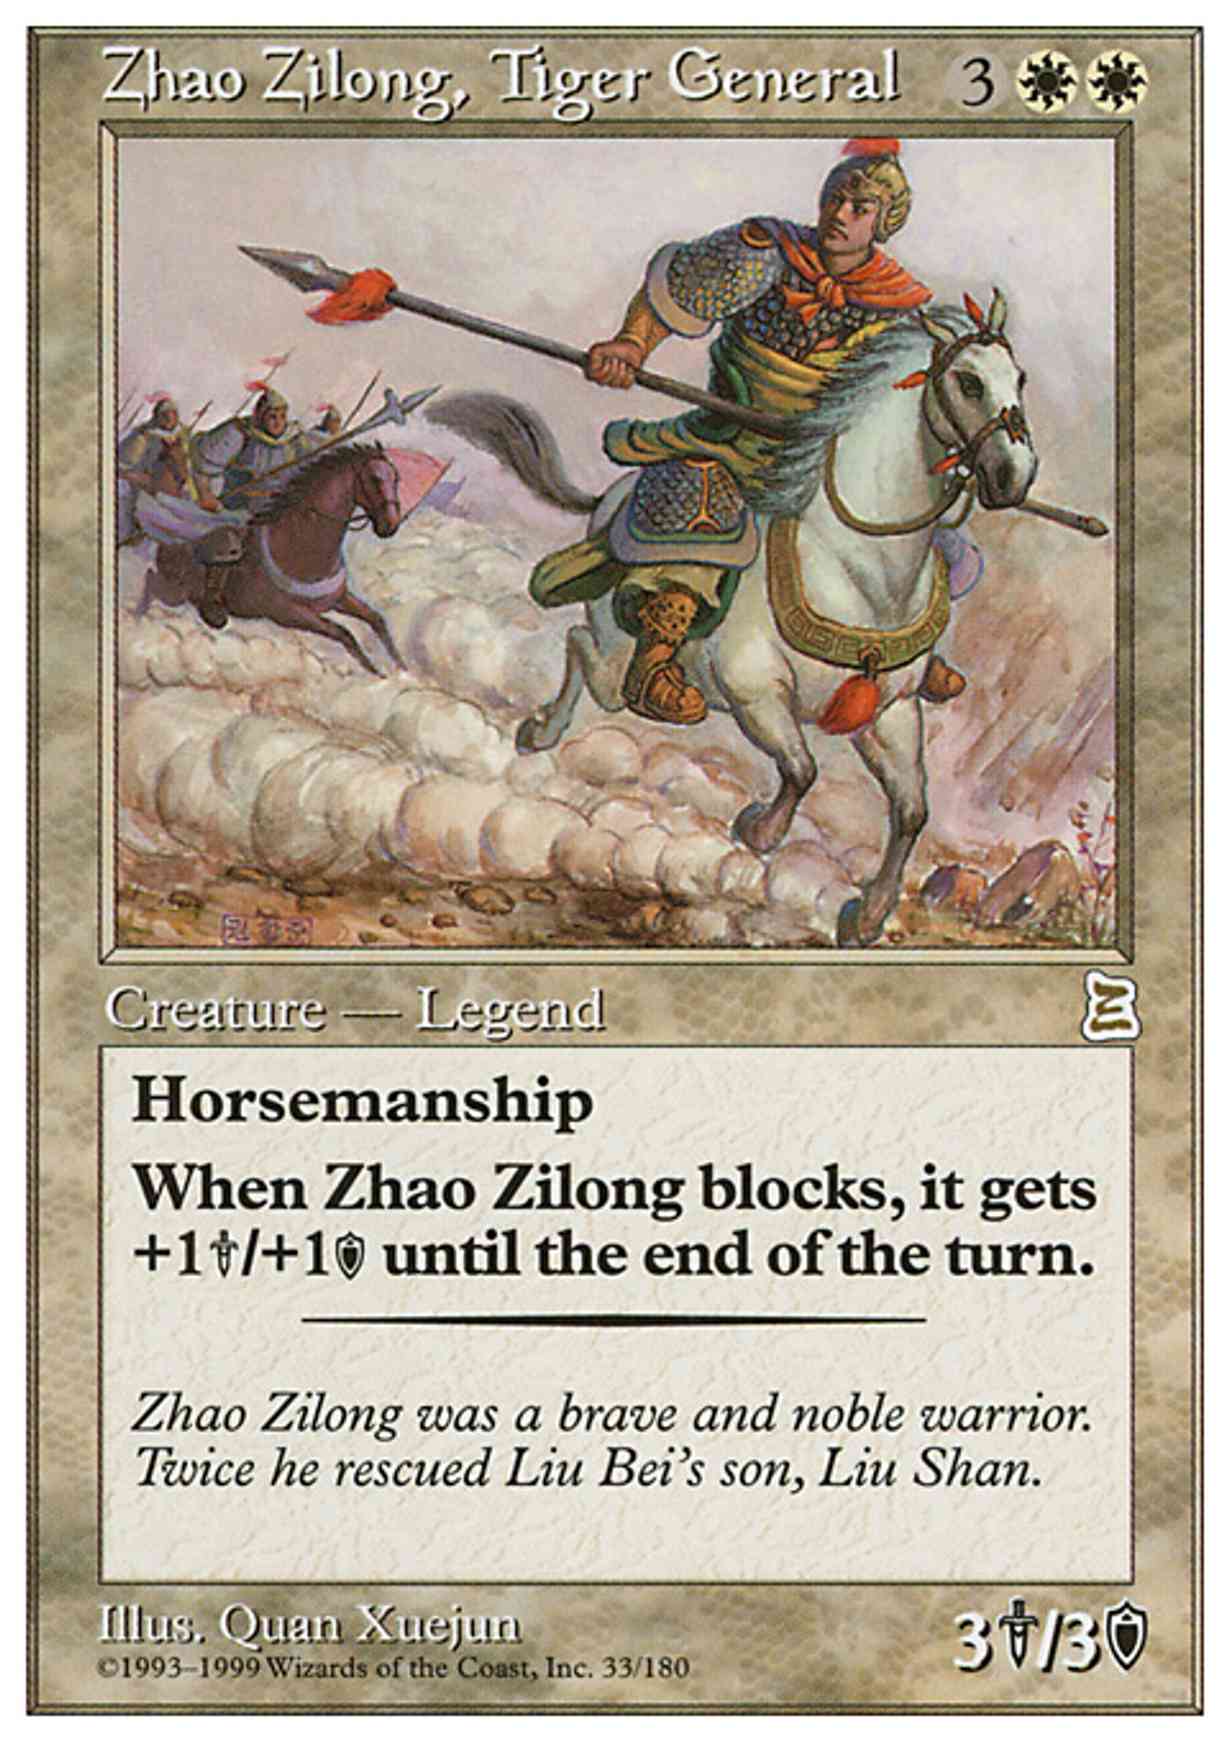 Zhao Zilong, Tiger General magic card front